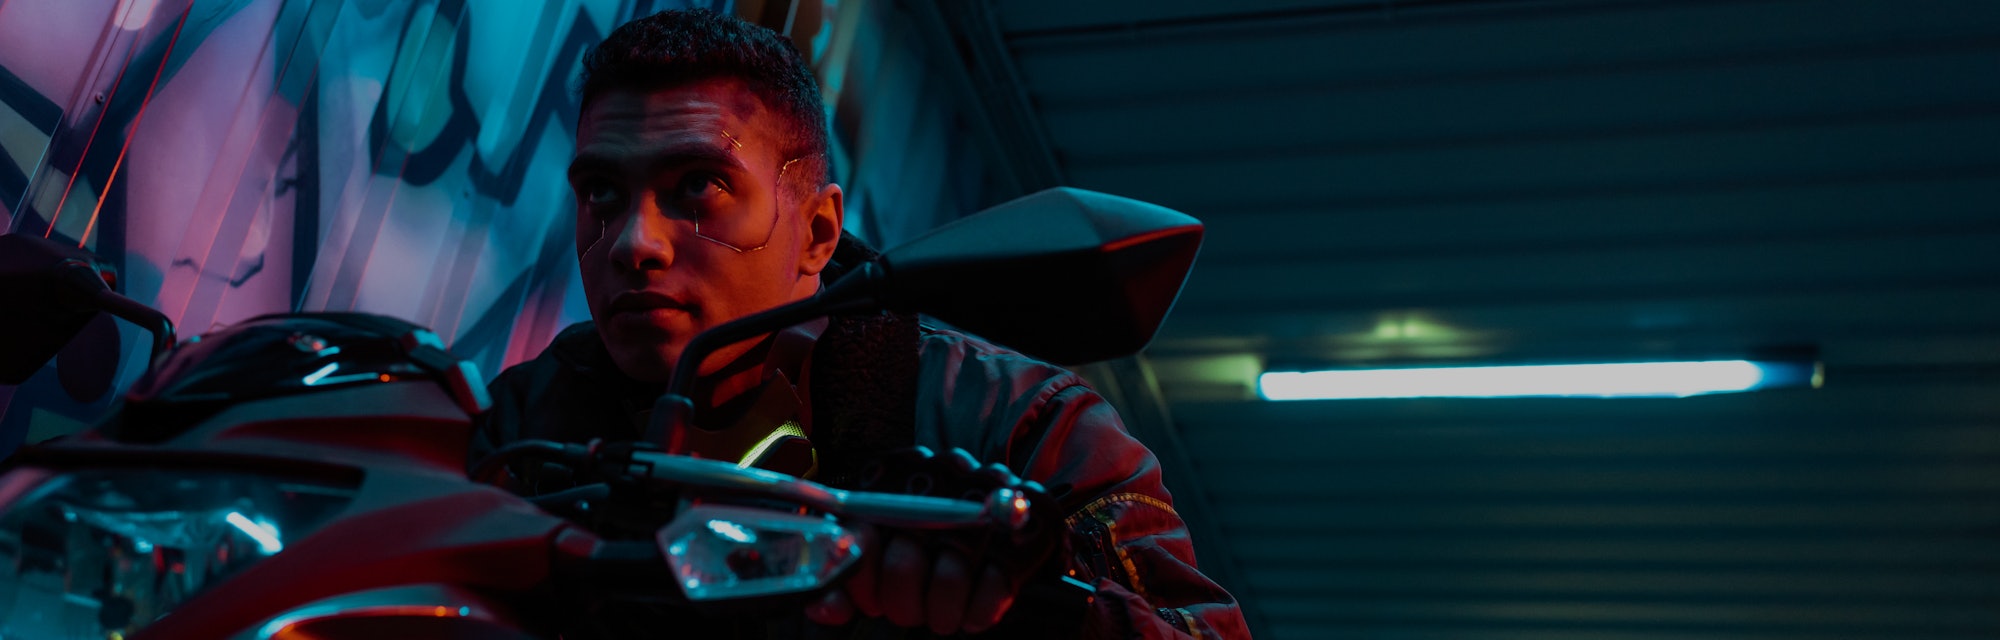 low angle view of handsome and mixed race cyberpunk player riding motorcycle